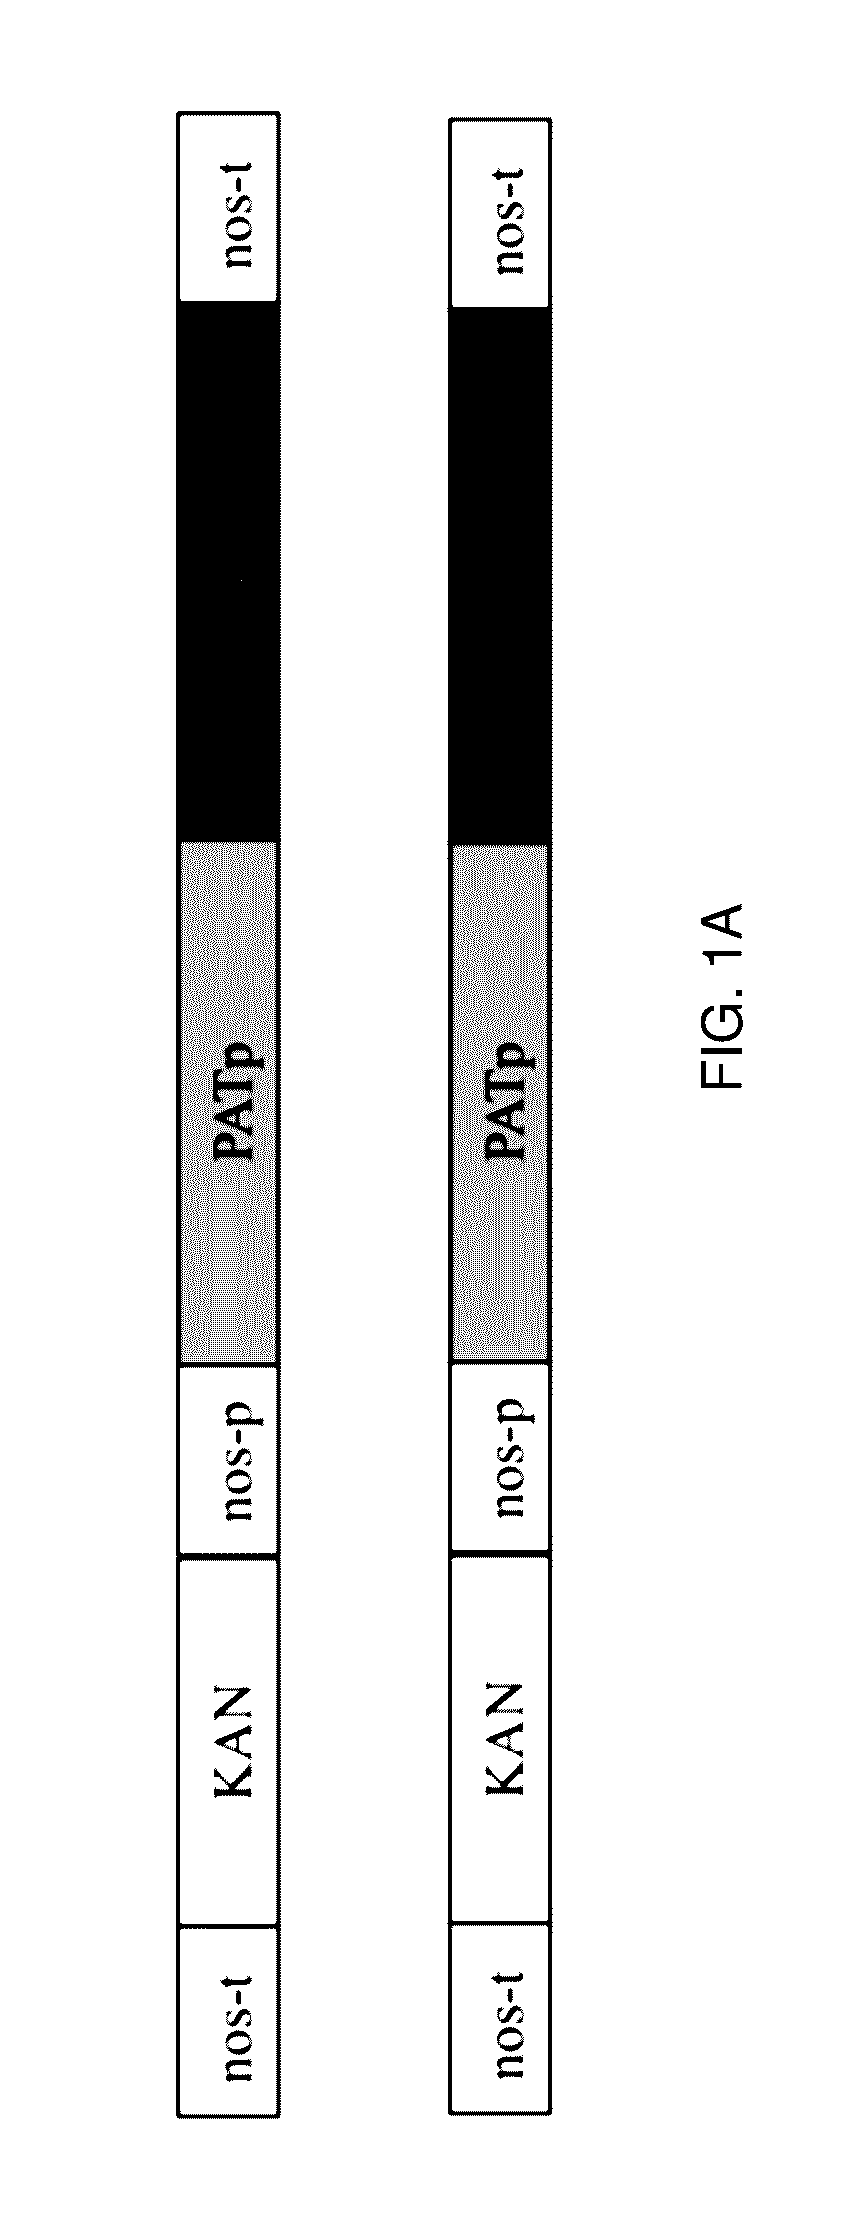 Methods And Materials For Producing Enhanced Sugar, Starch, Oil, And Cellulose Output Traits In Crop Plants